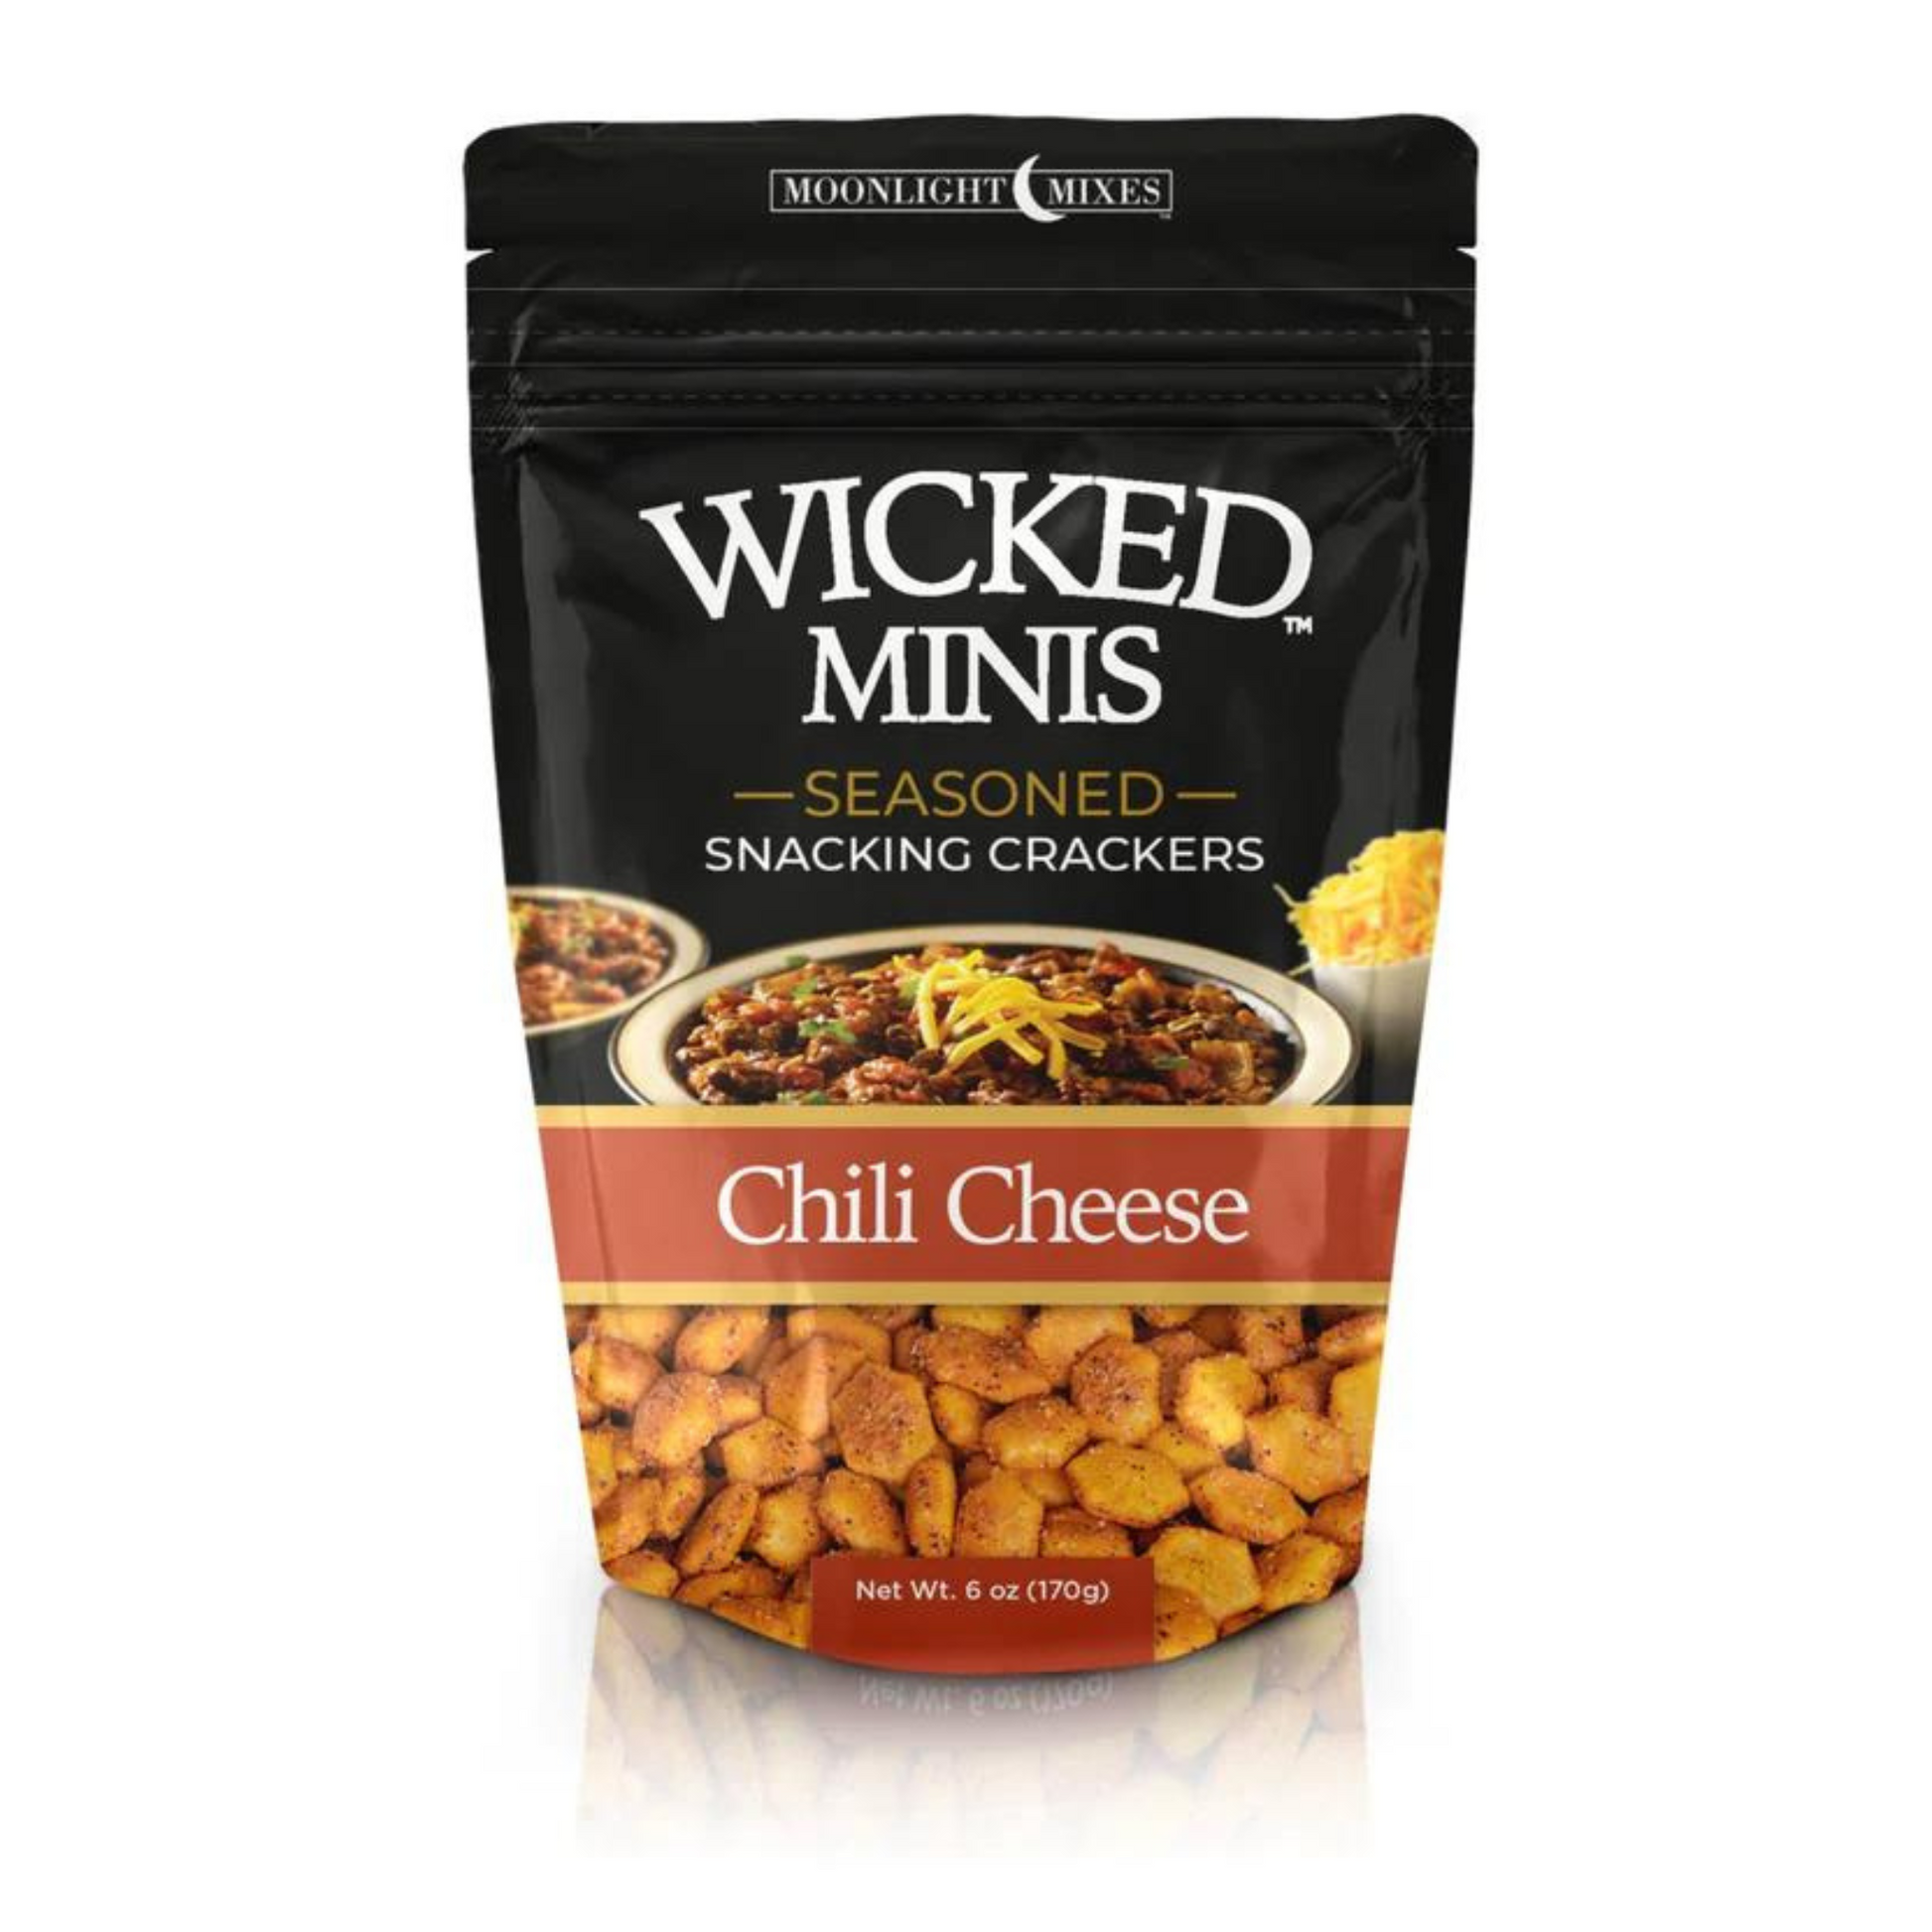 Wicked Minis in Chili Cheese